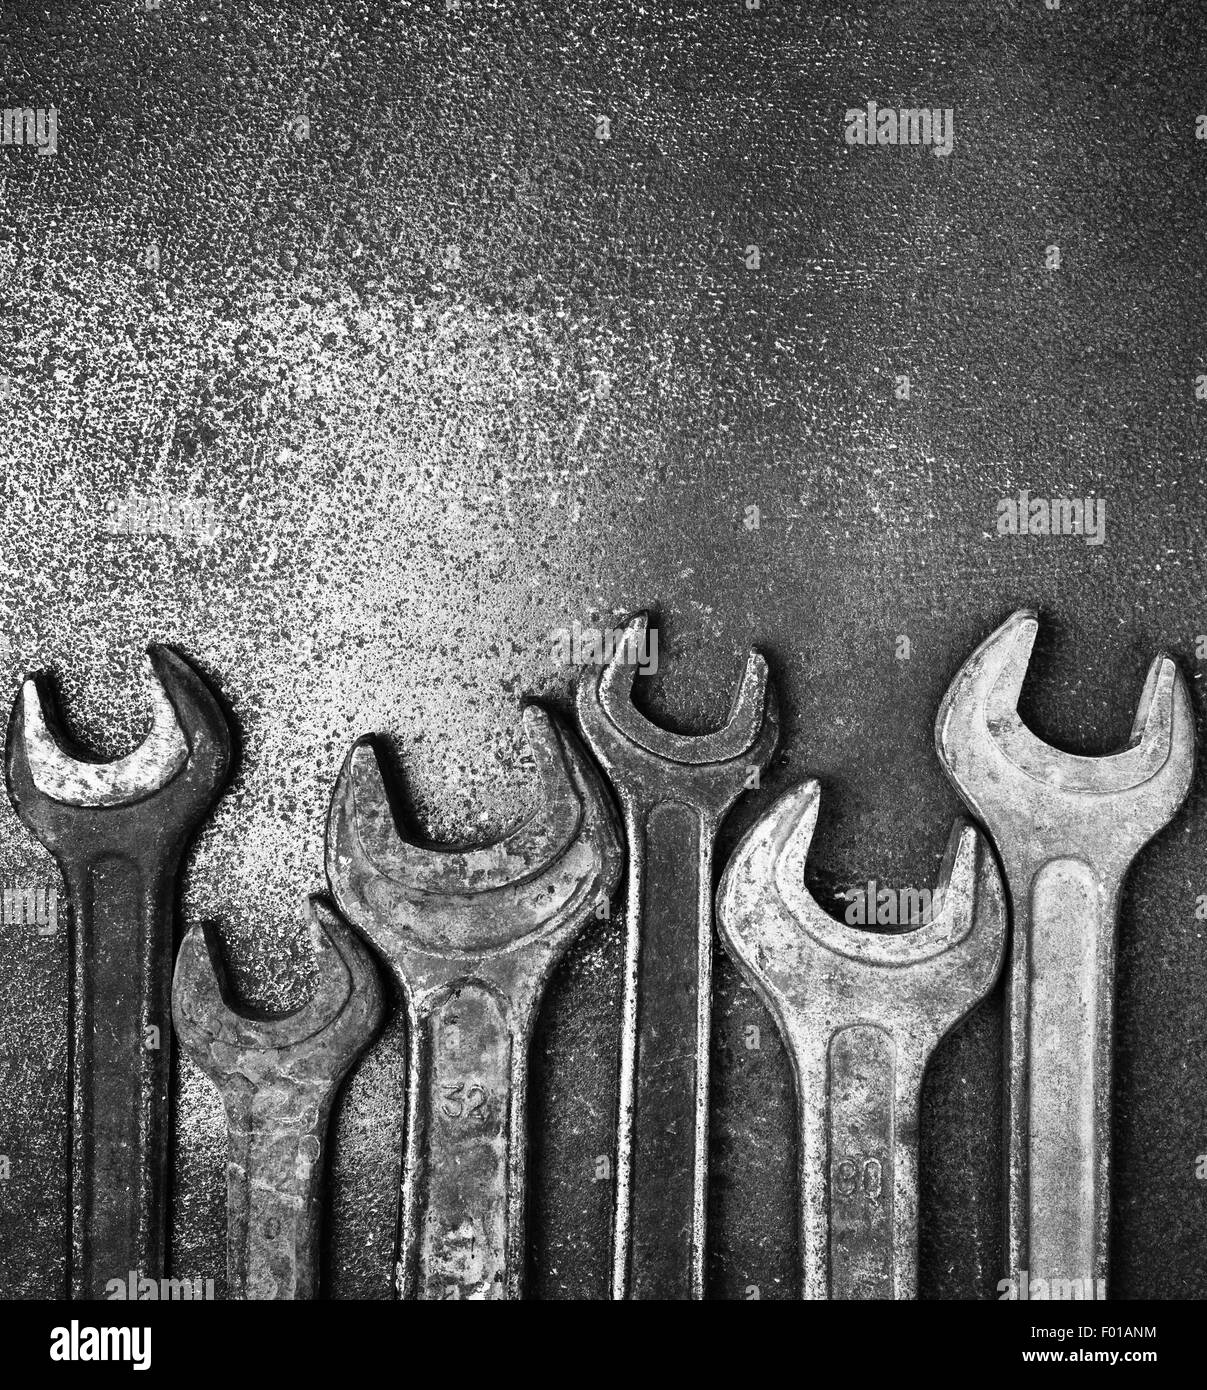 Old wrenches on a metal table, bw photo Stock Photo